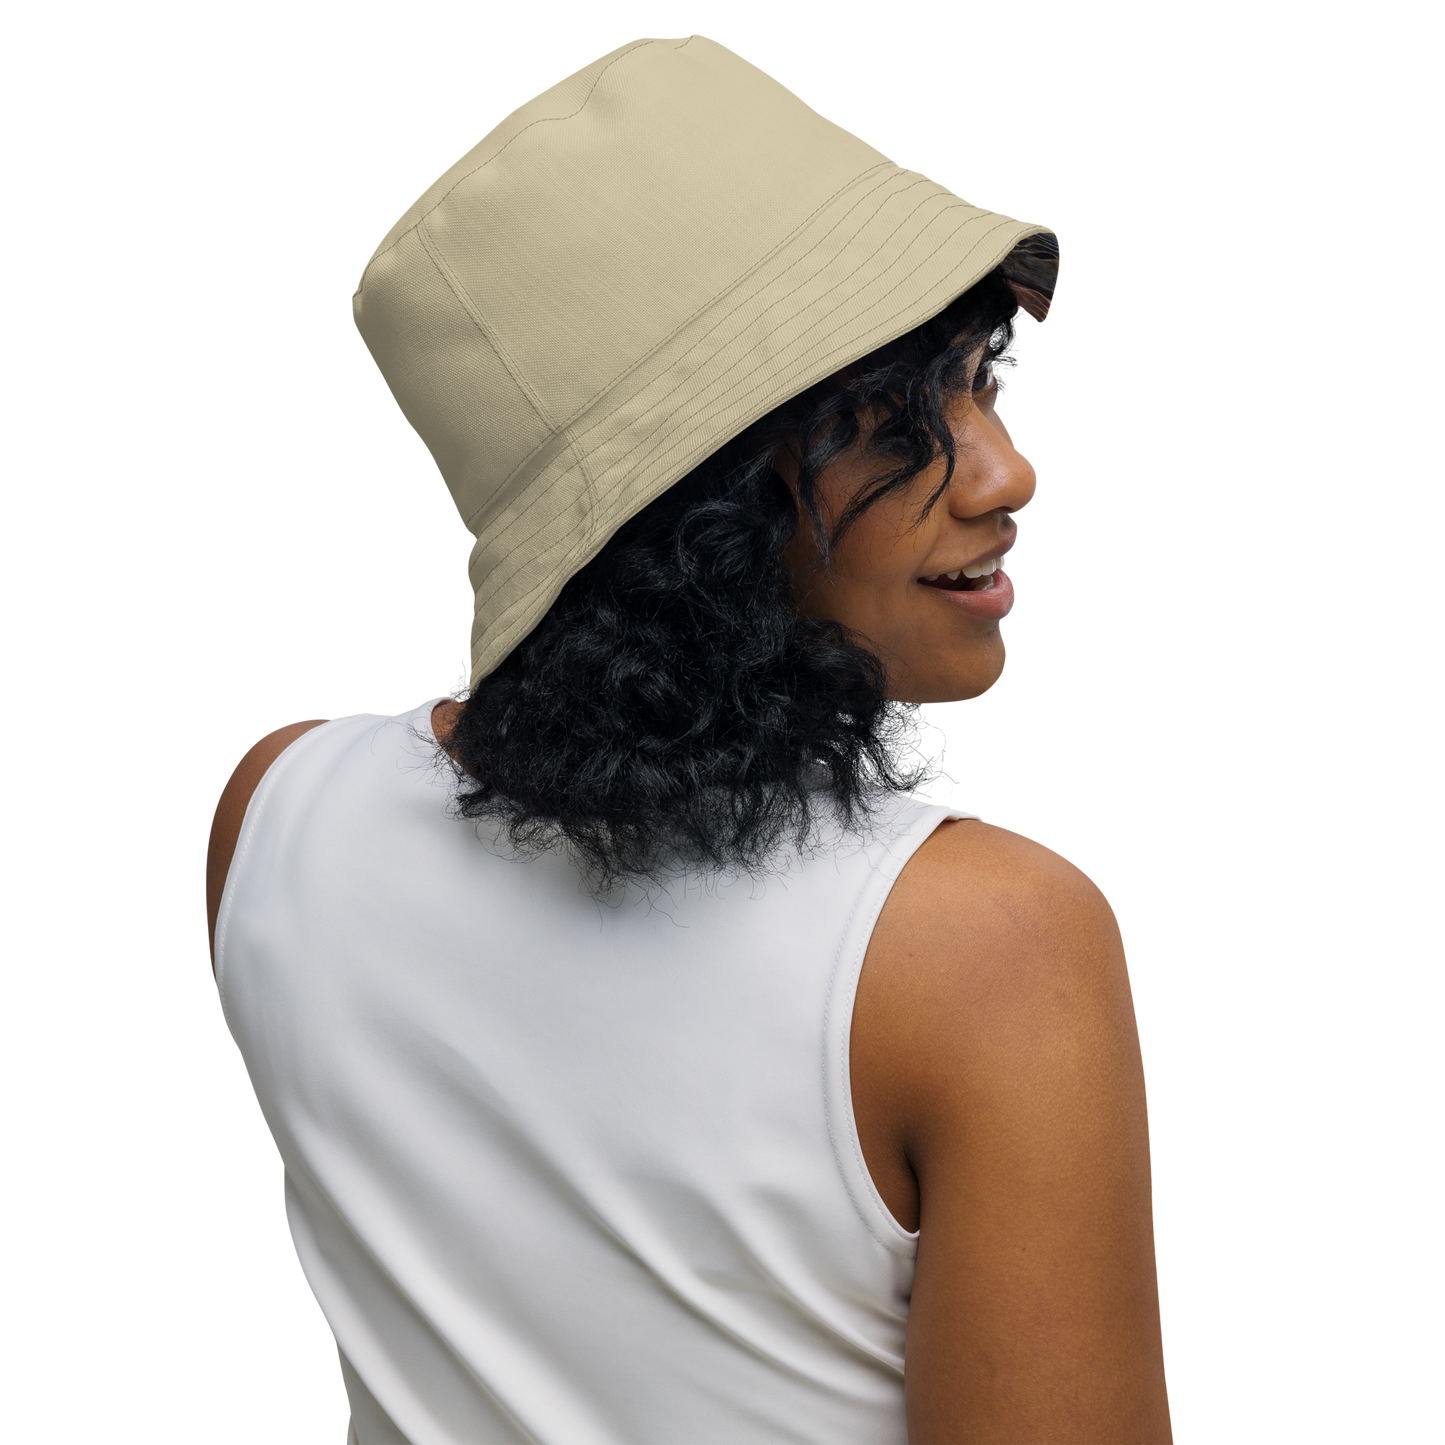 The EARTH LOVE Collection - "Rock Renaissance" Design Premium Reversible Bucket Hat - Light Beige Inside - Beach Hat, Gifts for Her, Gifts for Him